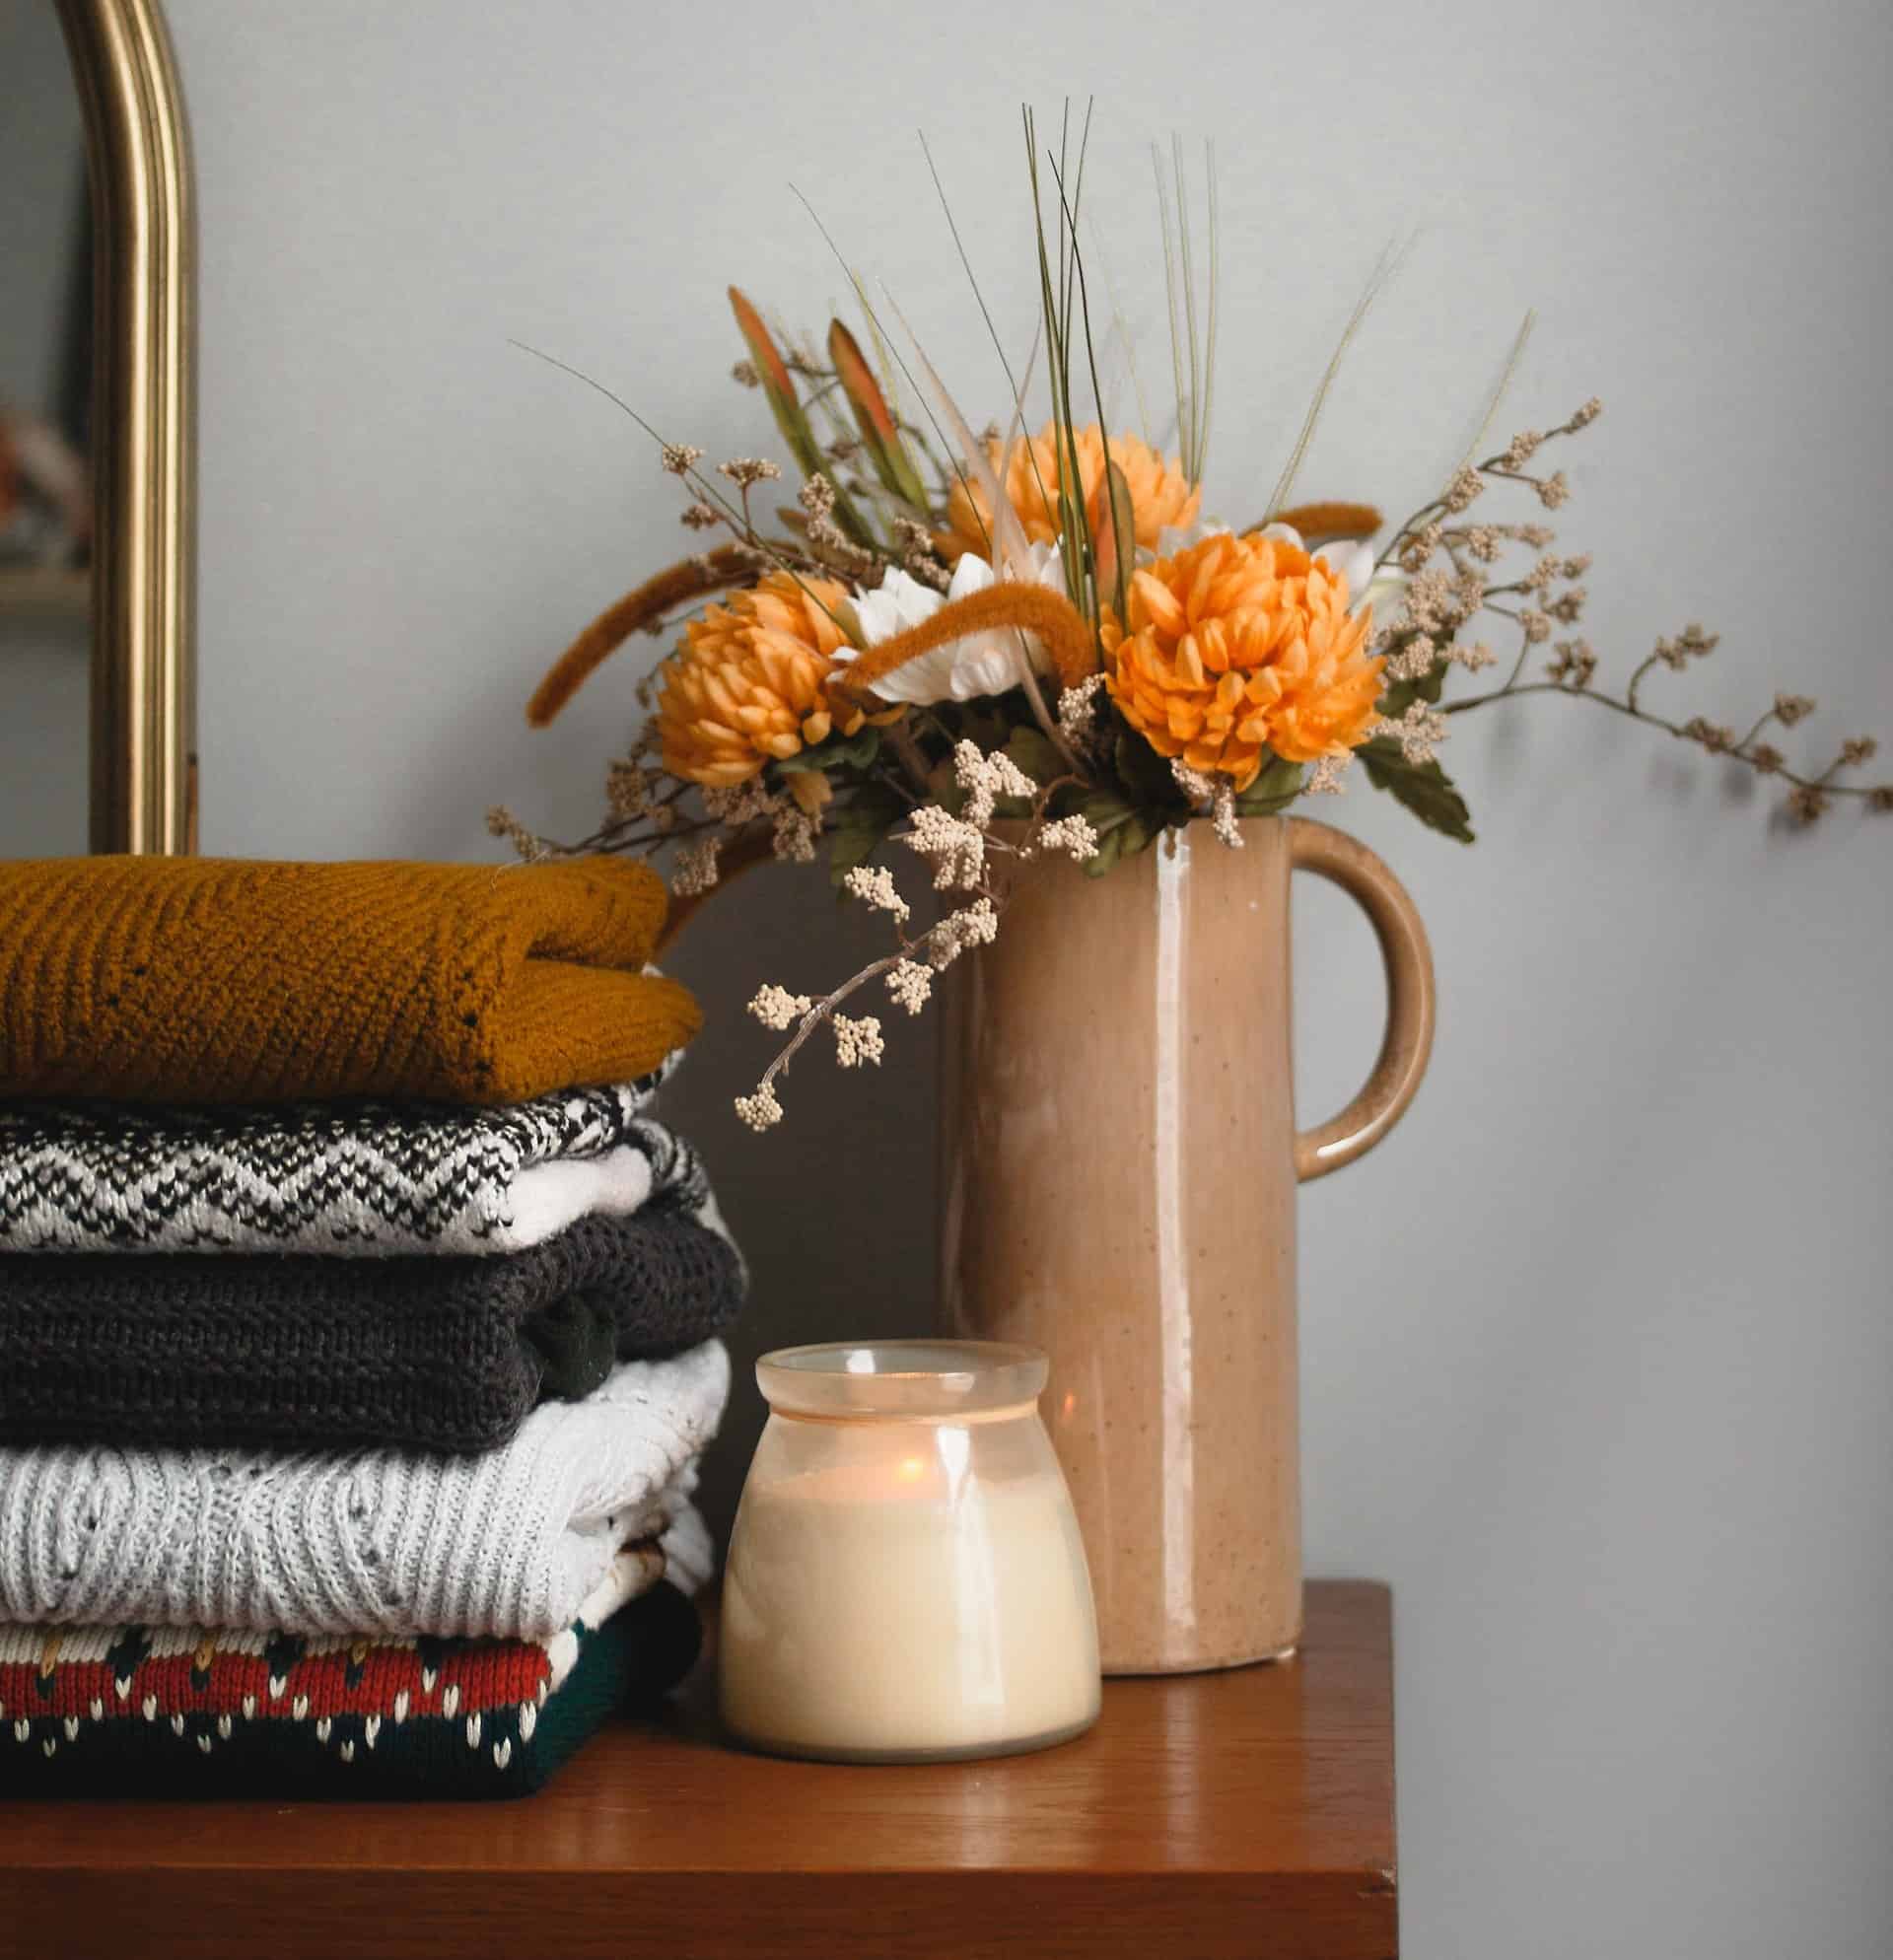 How to bring autumn into our interior? Learn about the latest design ideas